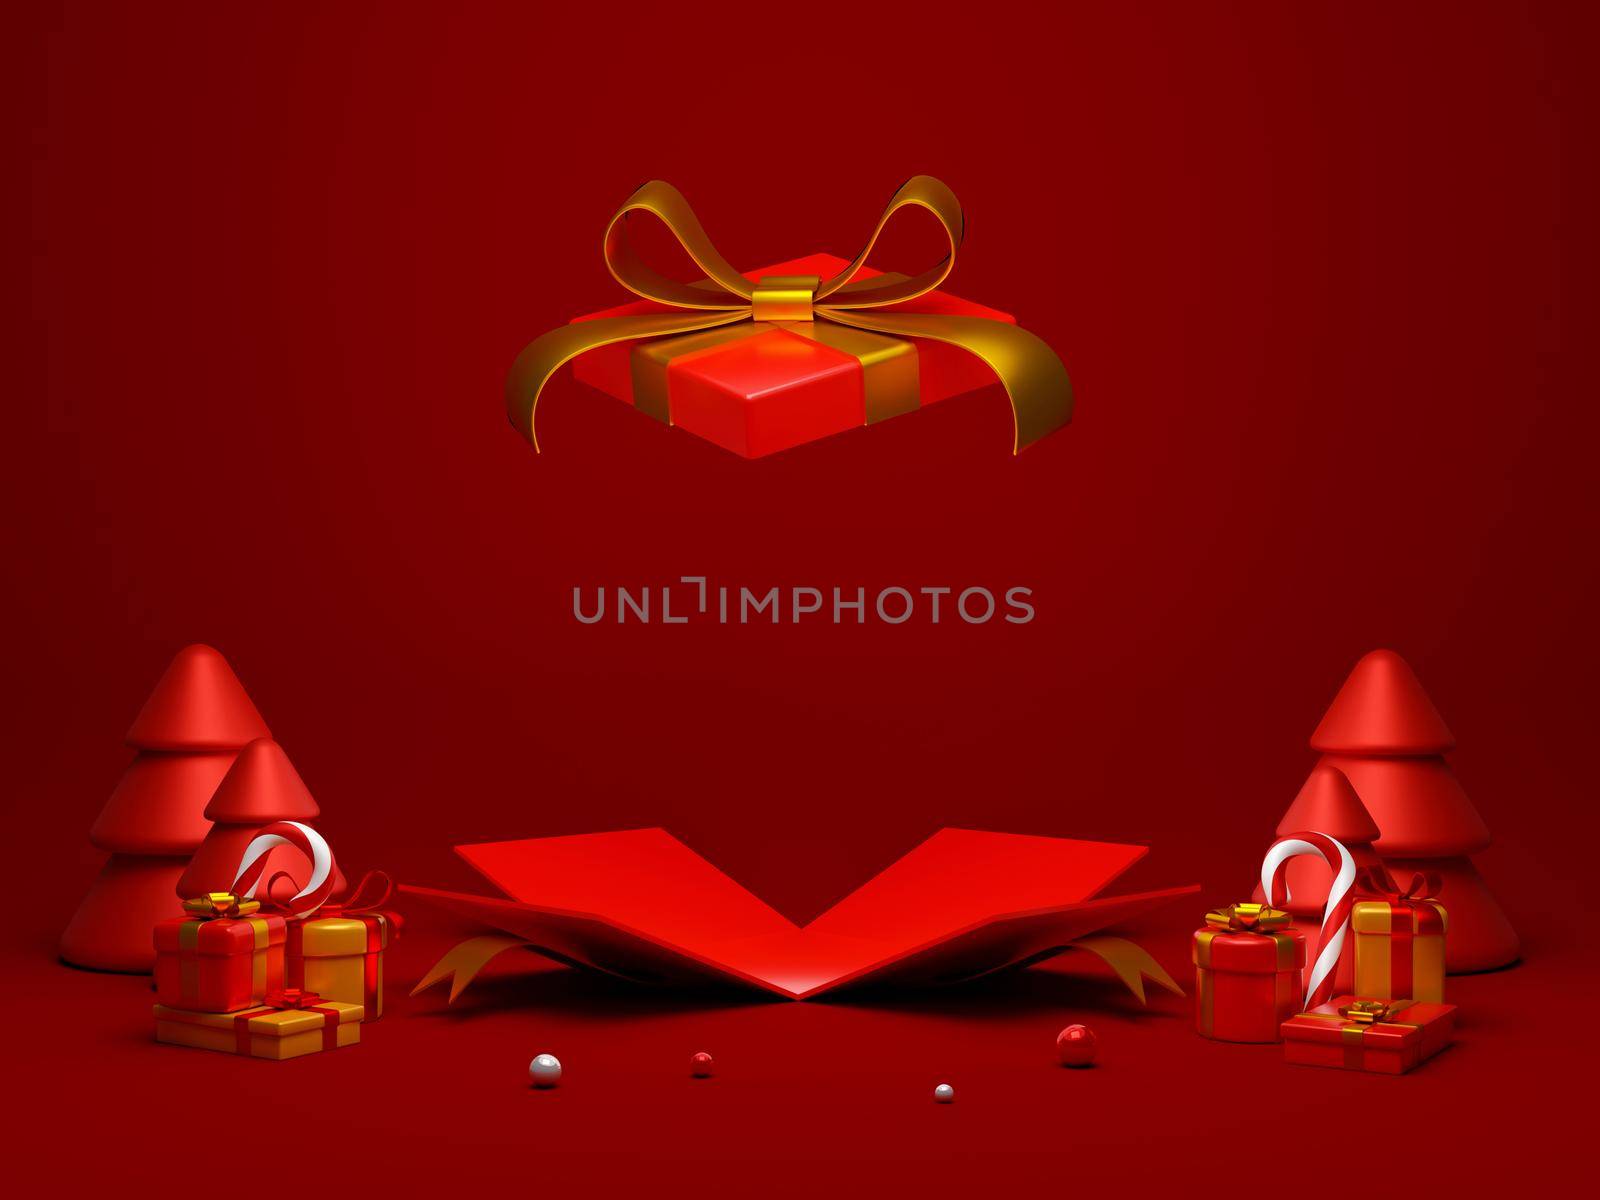 Opened Christmas gift box for product advertisement, 3d illustration by nutzchotwarut